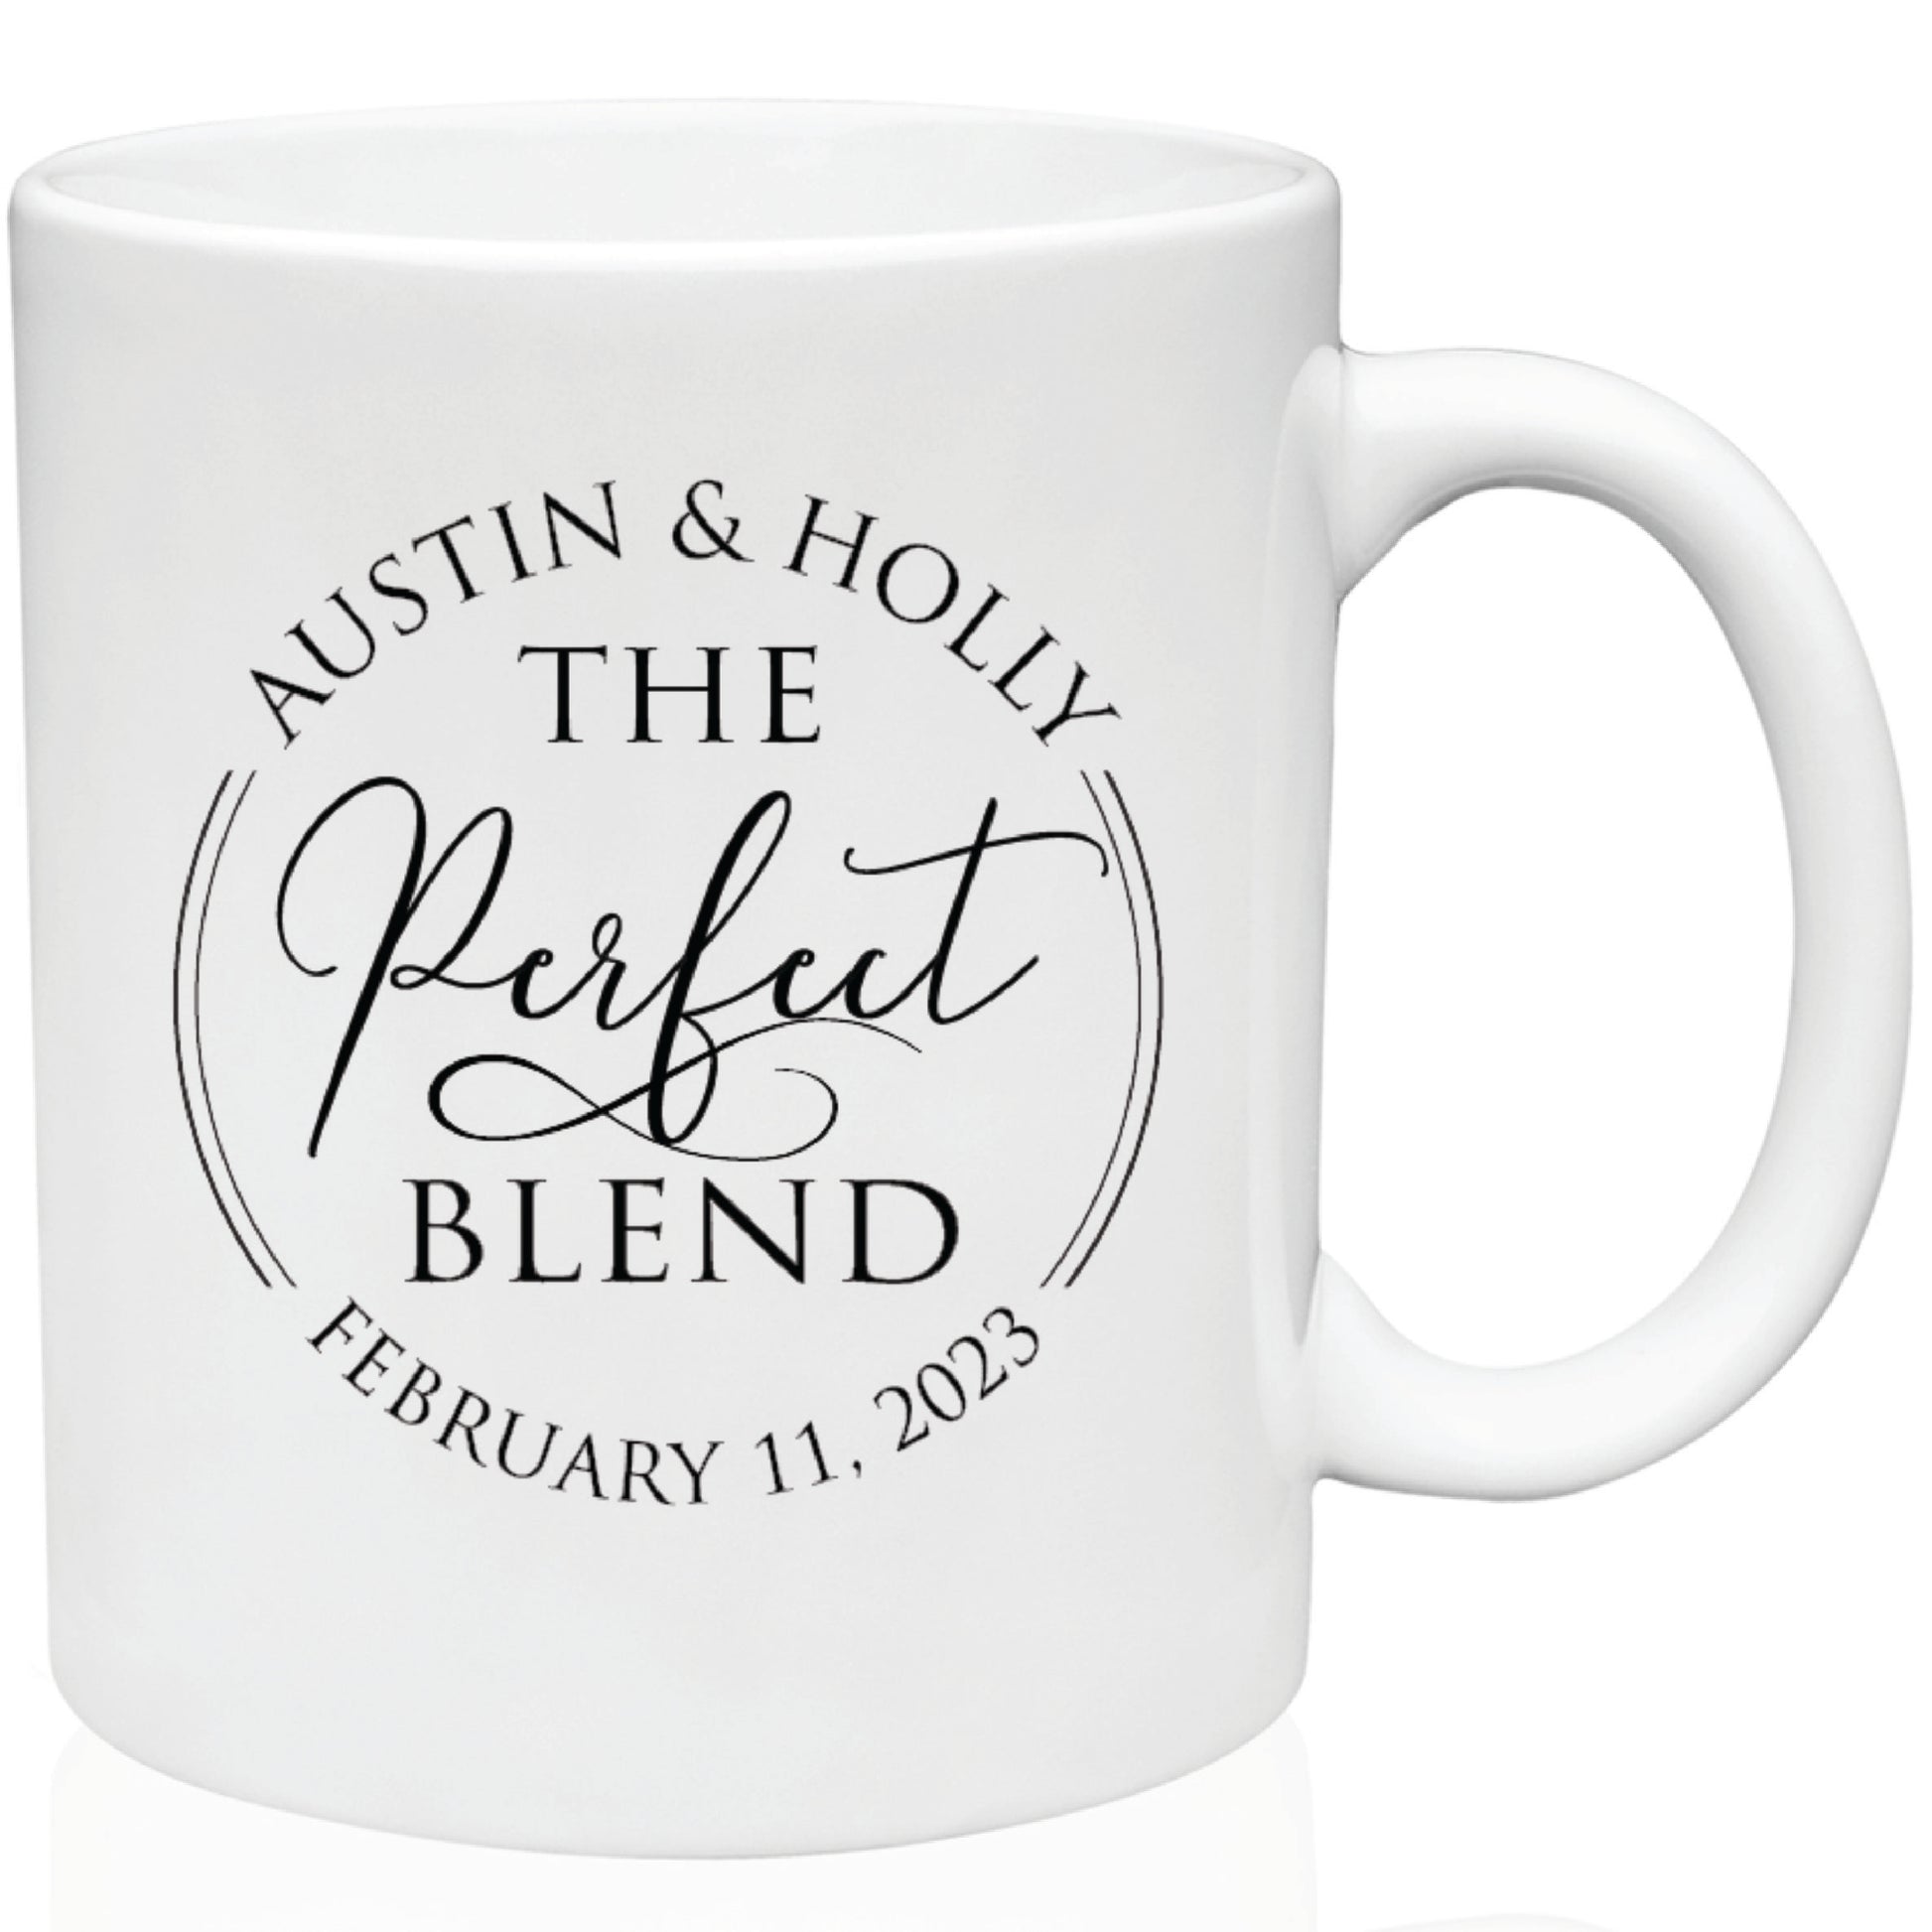 The perfect blend wedding coffee mugs – Factory21 Store